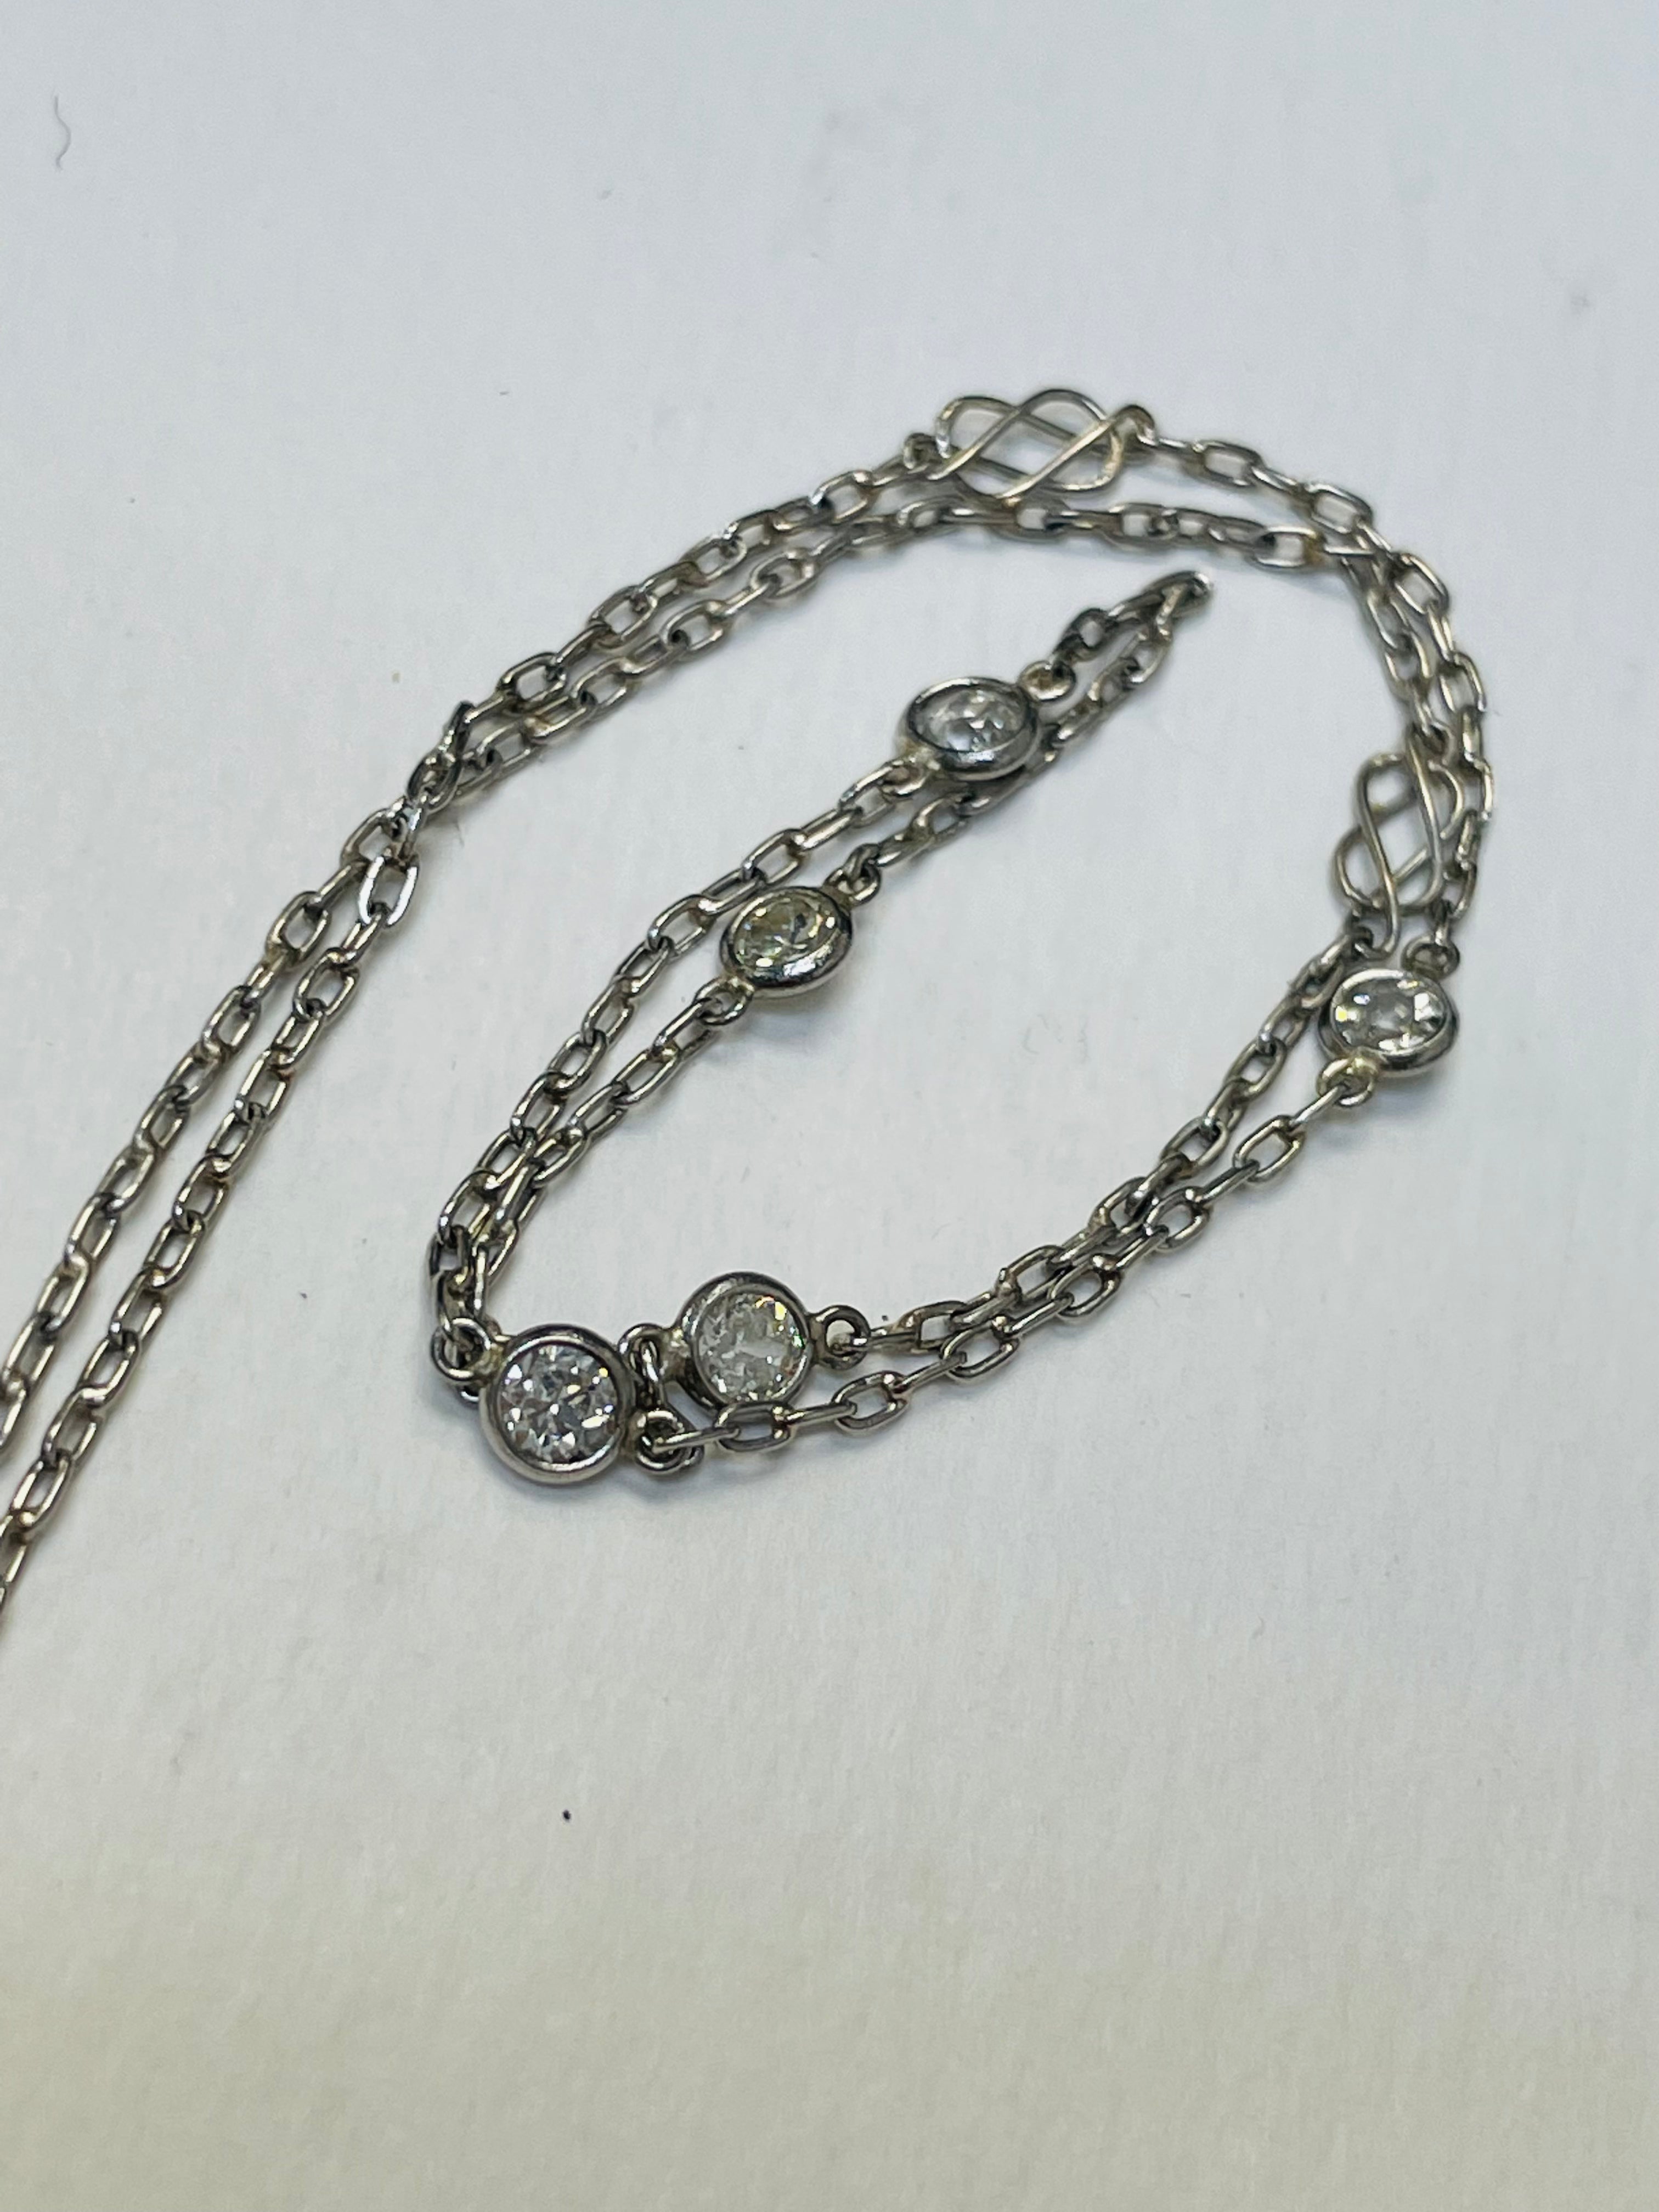 .45CT Old Mine Cut Diamond Platinum by the Yard Necklace 18”